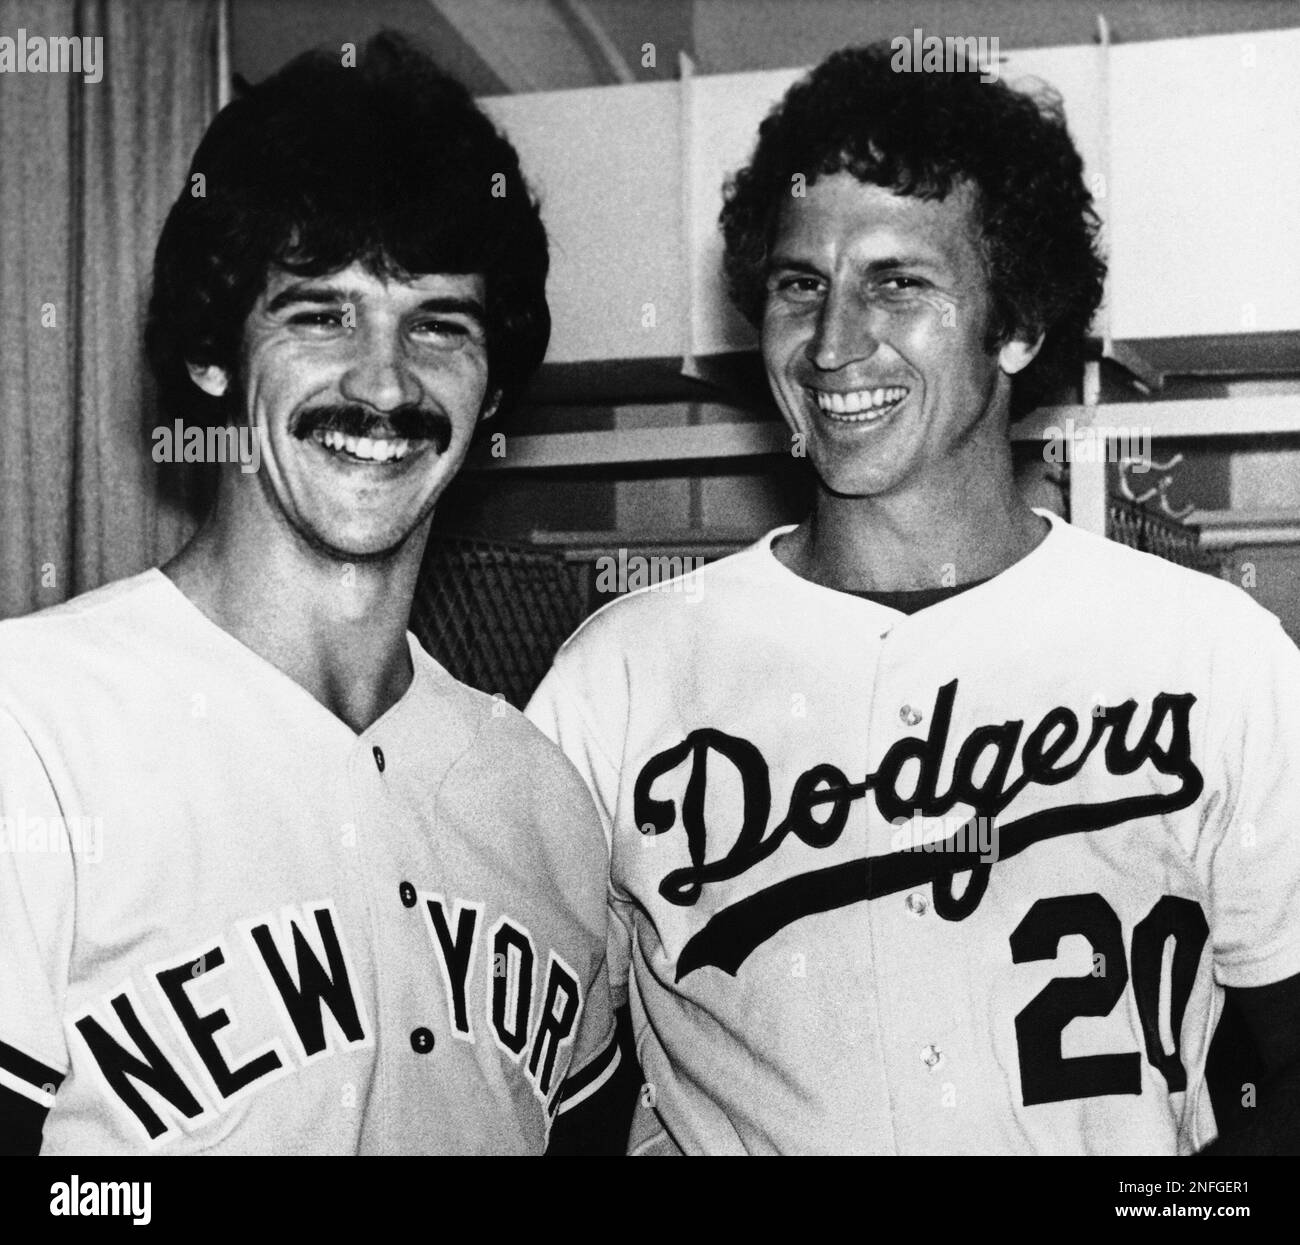 New York Yankees pitcher Ron Guidry, left, laughs with Los Angeles Dodgers  pitcher Don Sutton Wednesday, Oct. 11, 1978 in Los Angeles where it was  announced they would be the starting pitchers